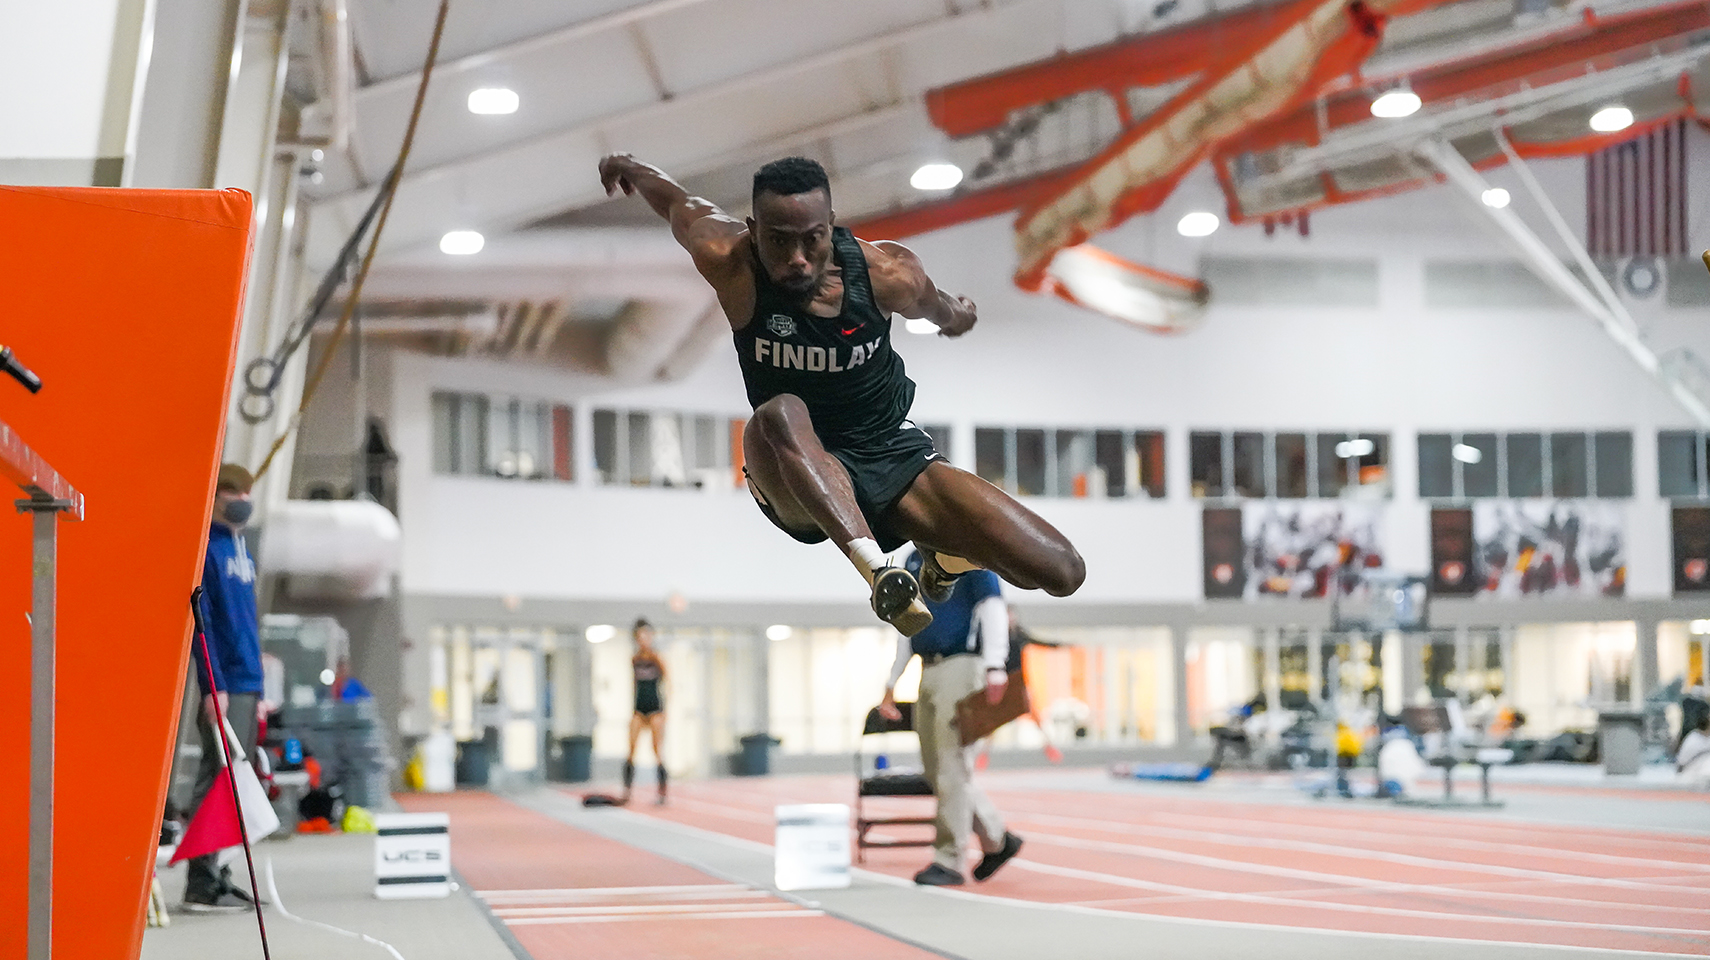 Men's track athlete jumping high in the air